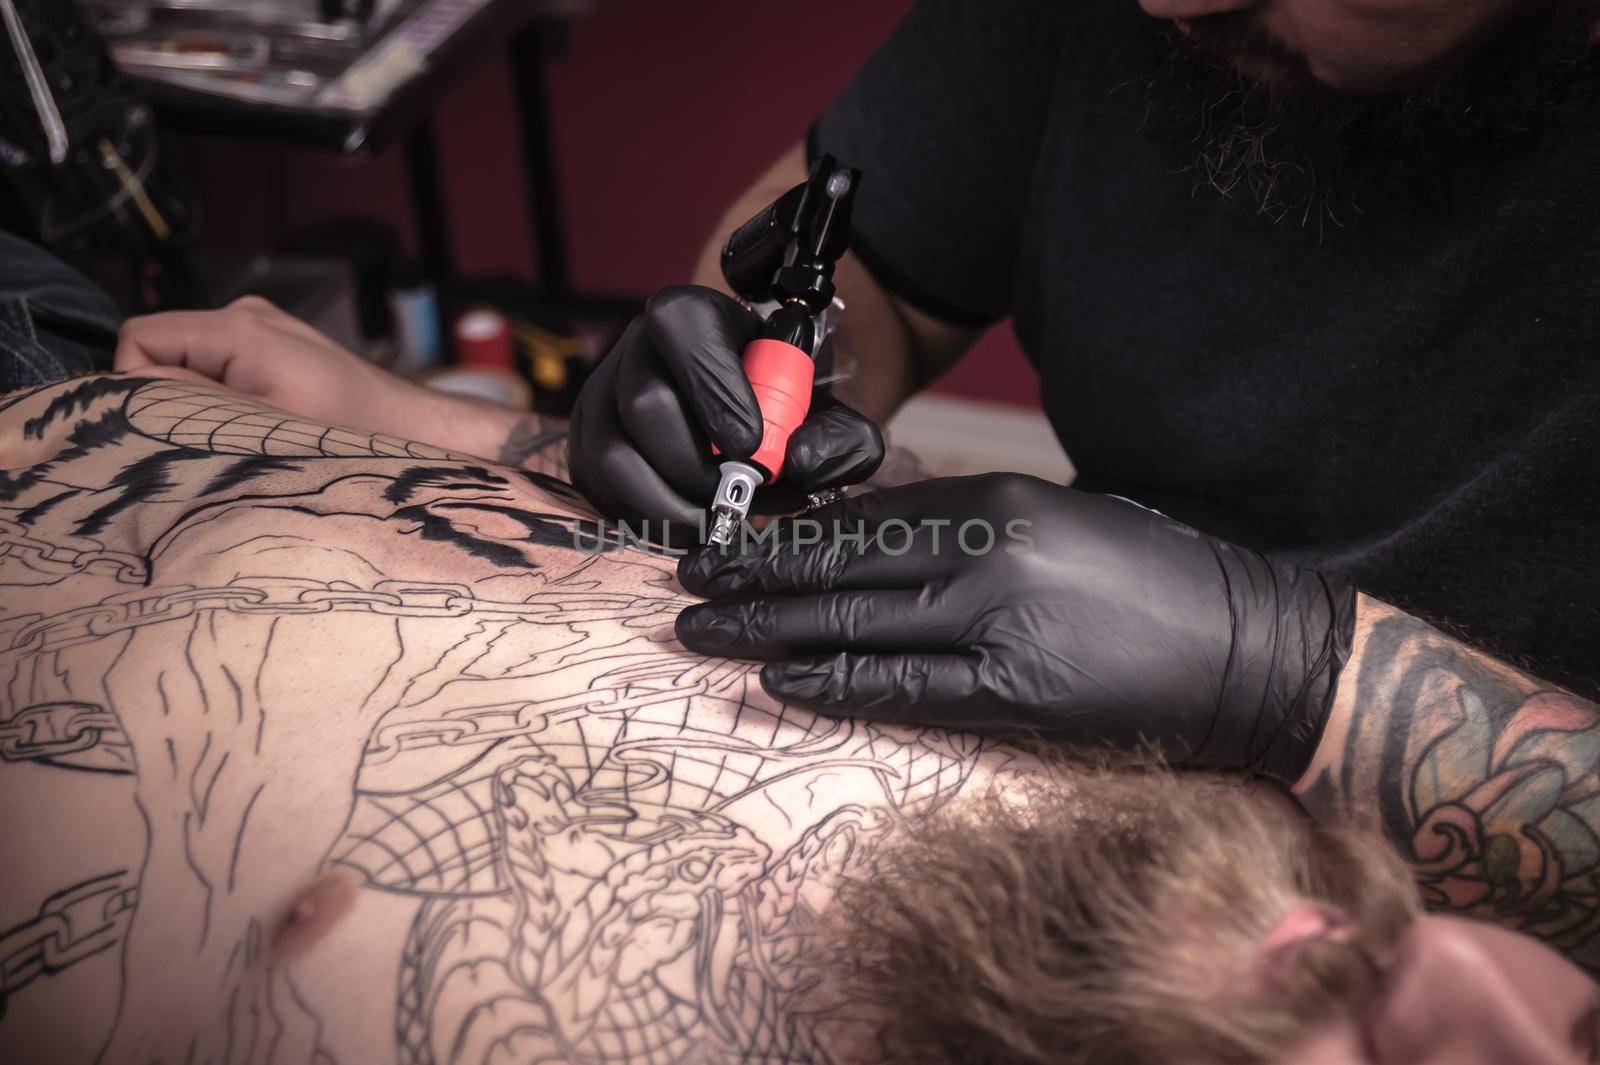 Tattoo specialist focused on his work in a workshop studio.